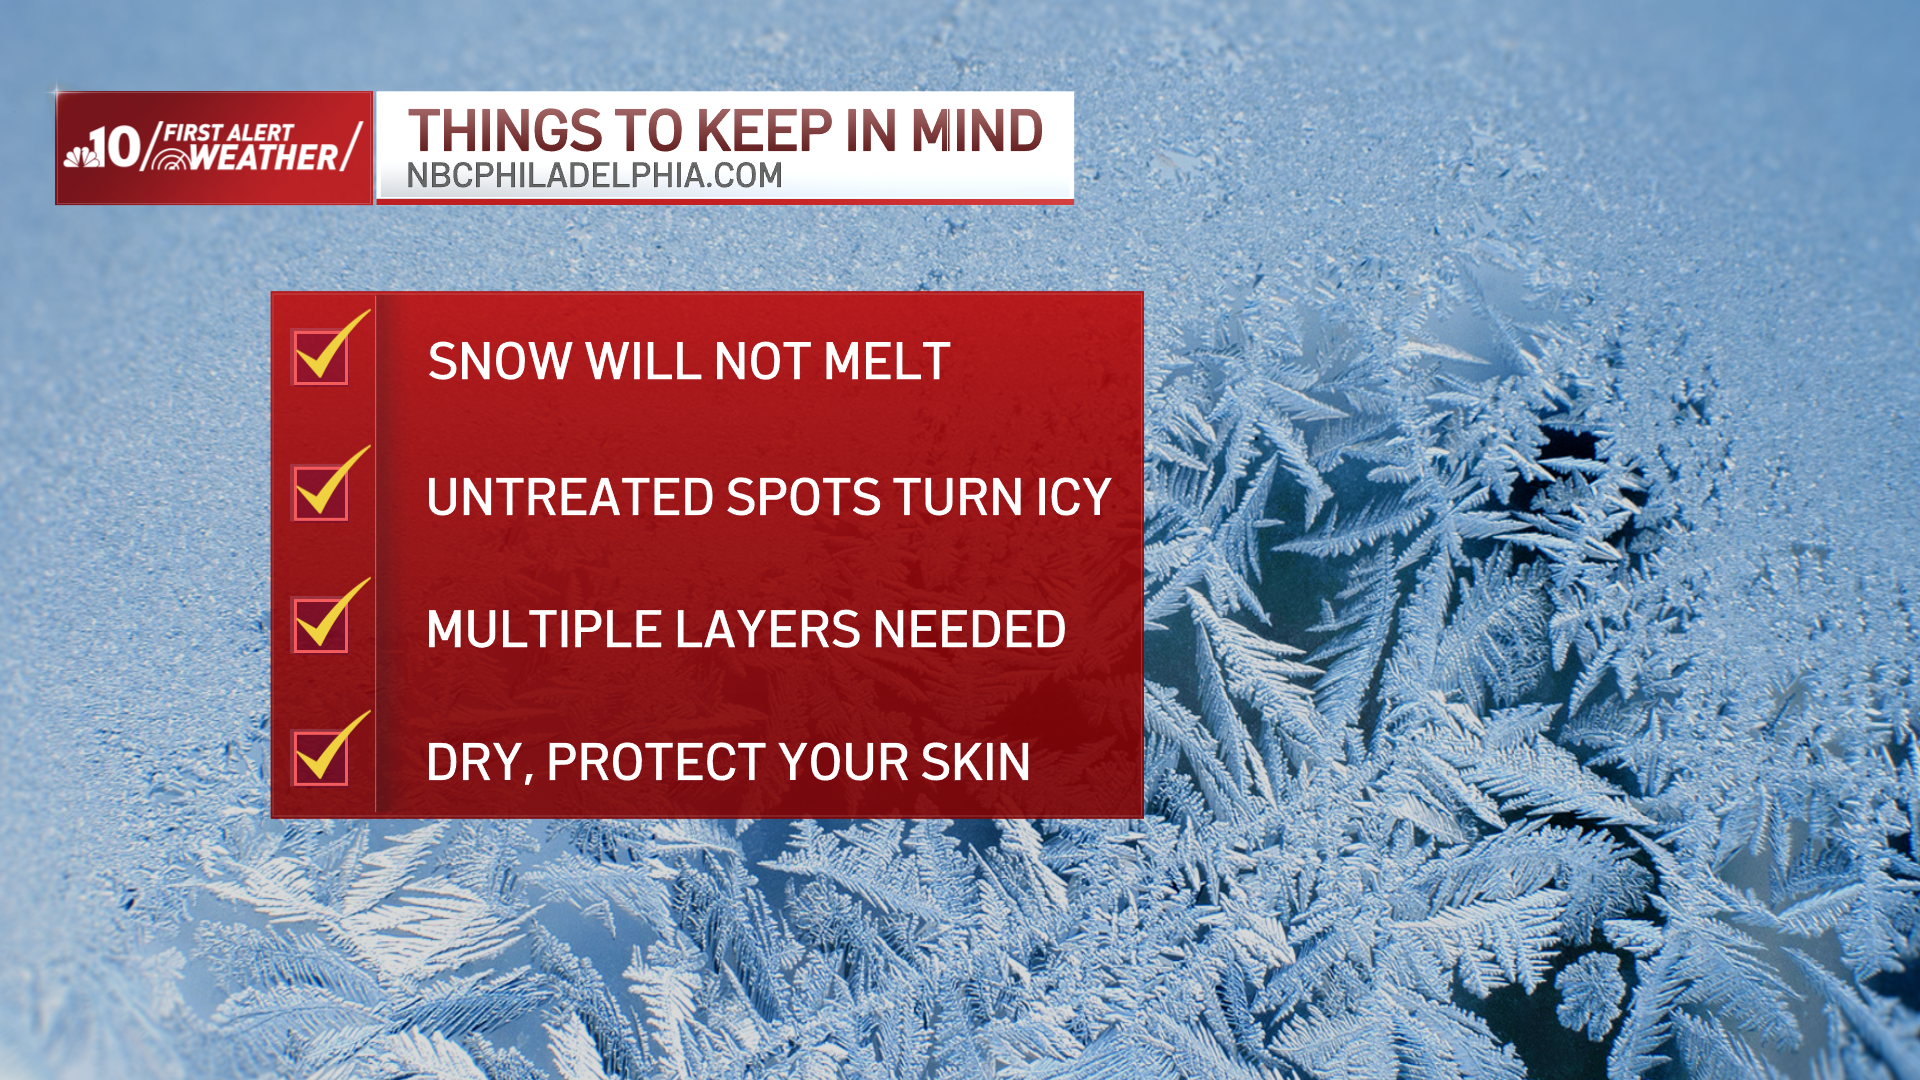 Things to keep in mind as temps plummet after snow fell.